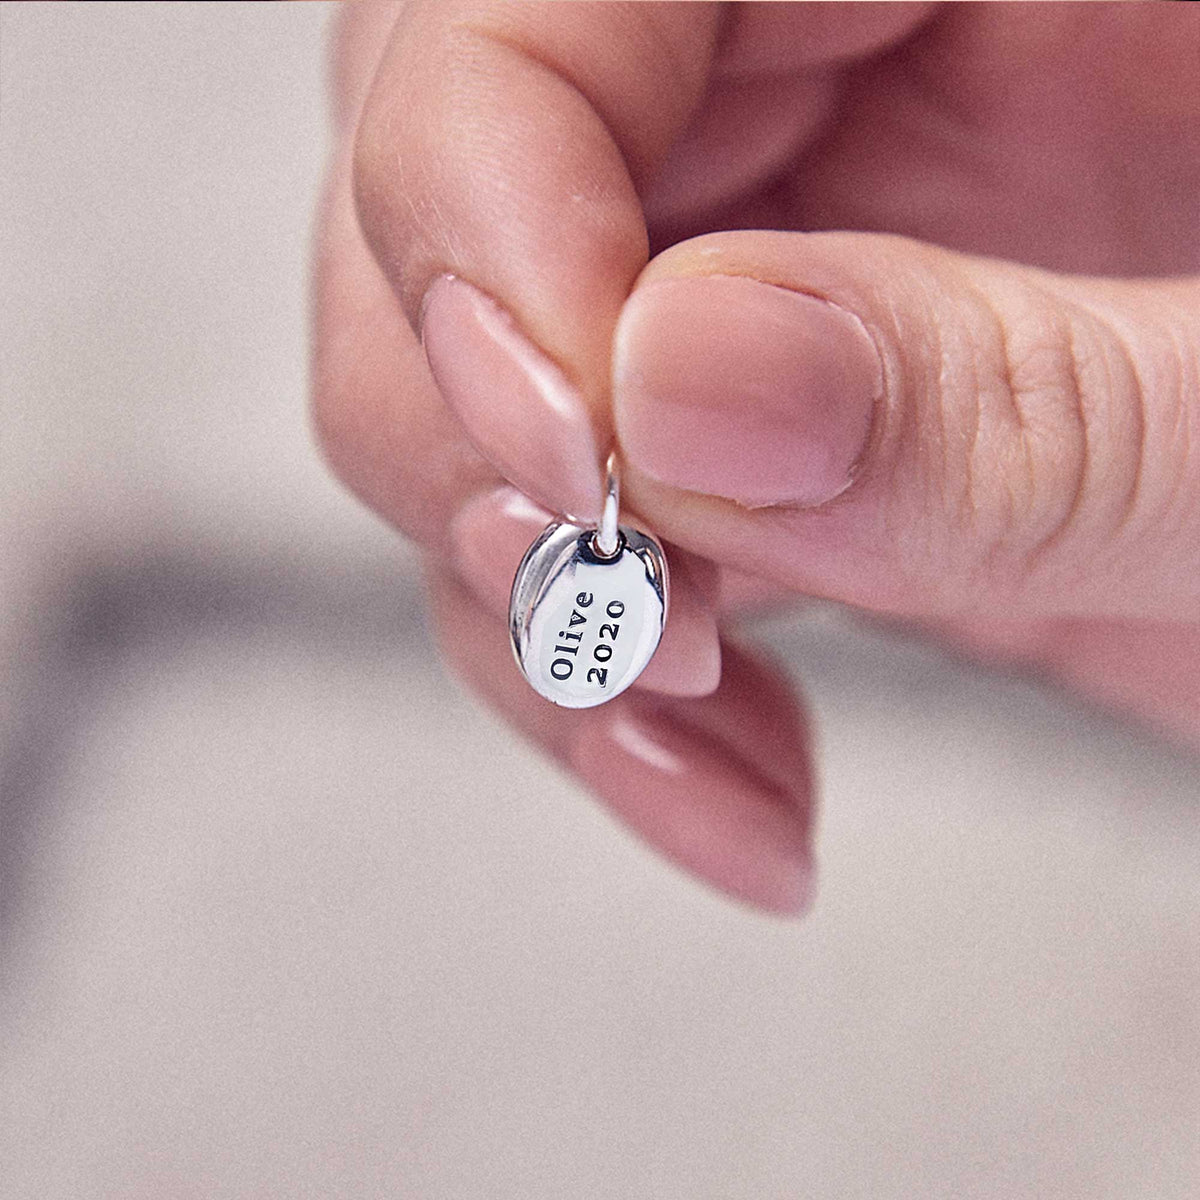 Personalised pebble silver charm engraved with name and date mothers day gift idea